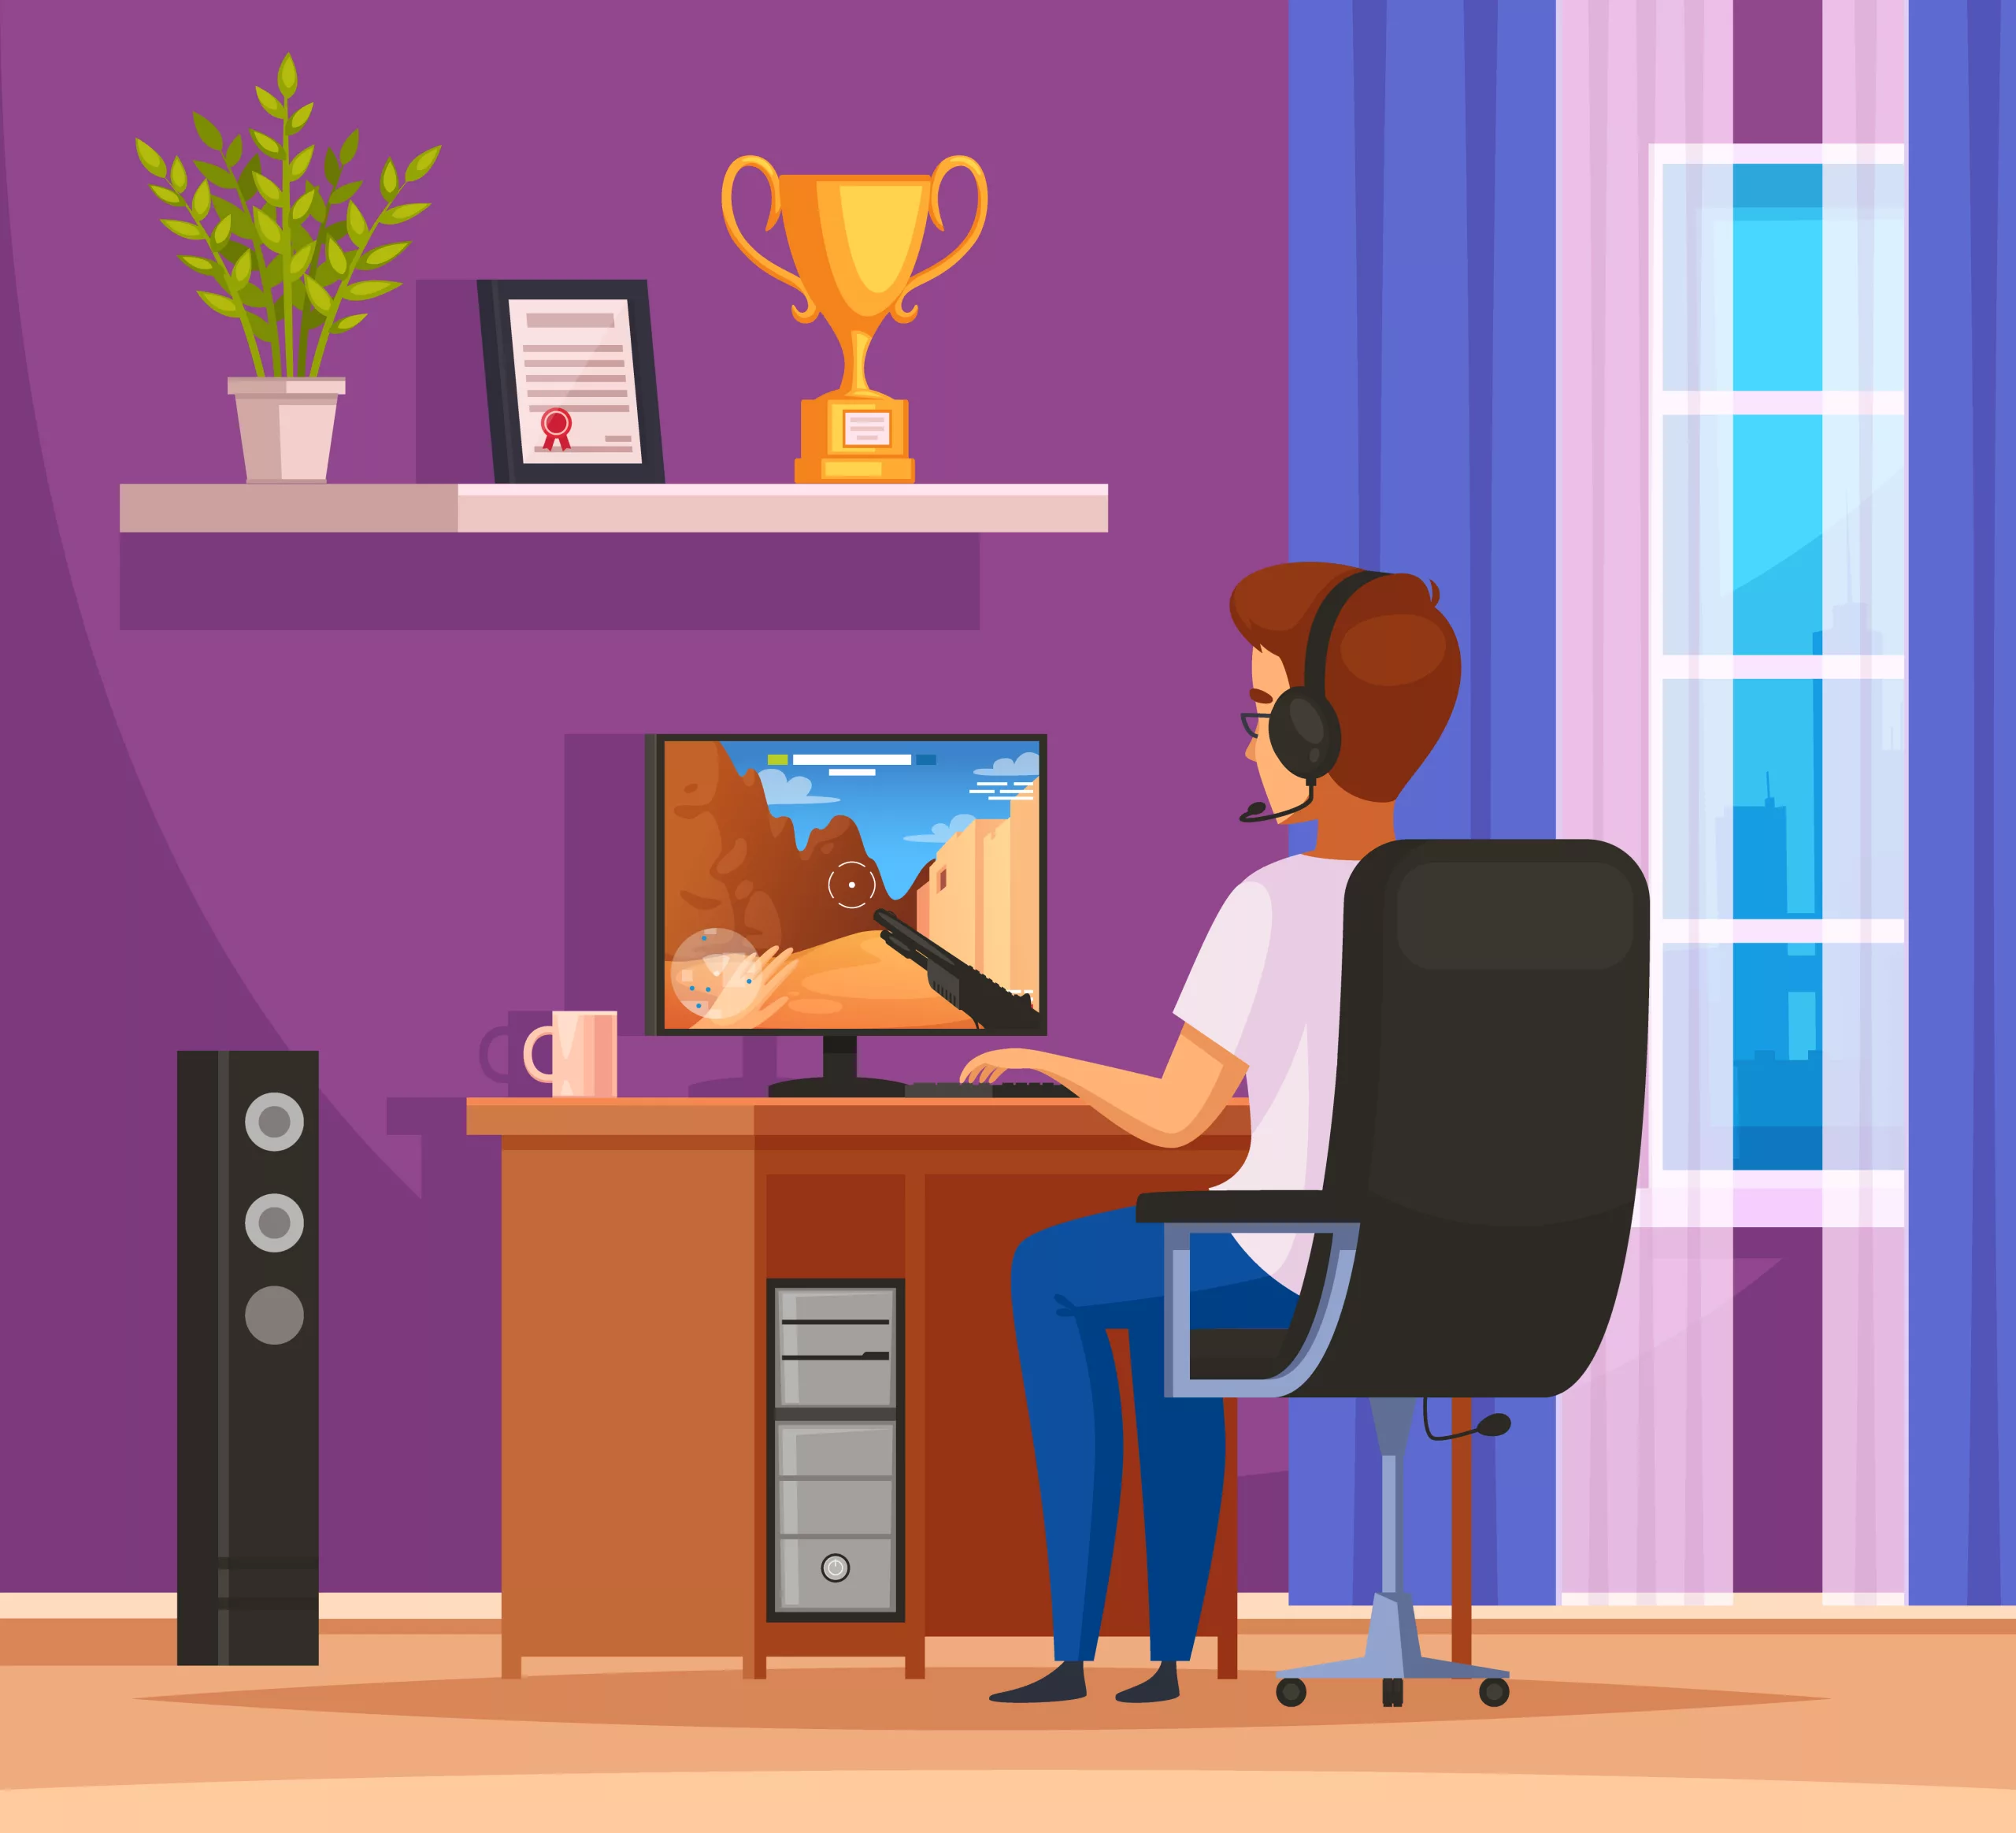 Cybersport gaming character cartoon composition with young man wearing headset in front of desktop computer vector illustration